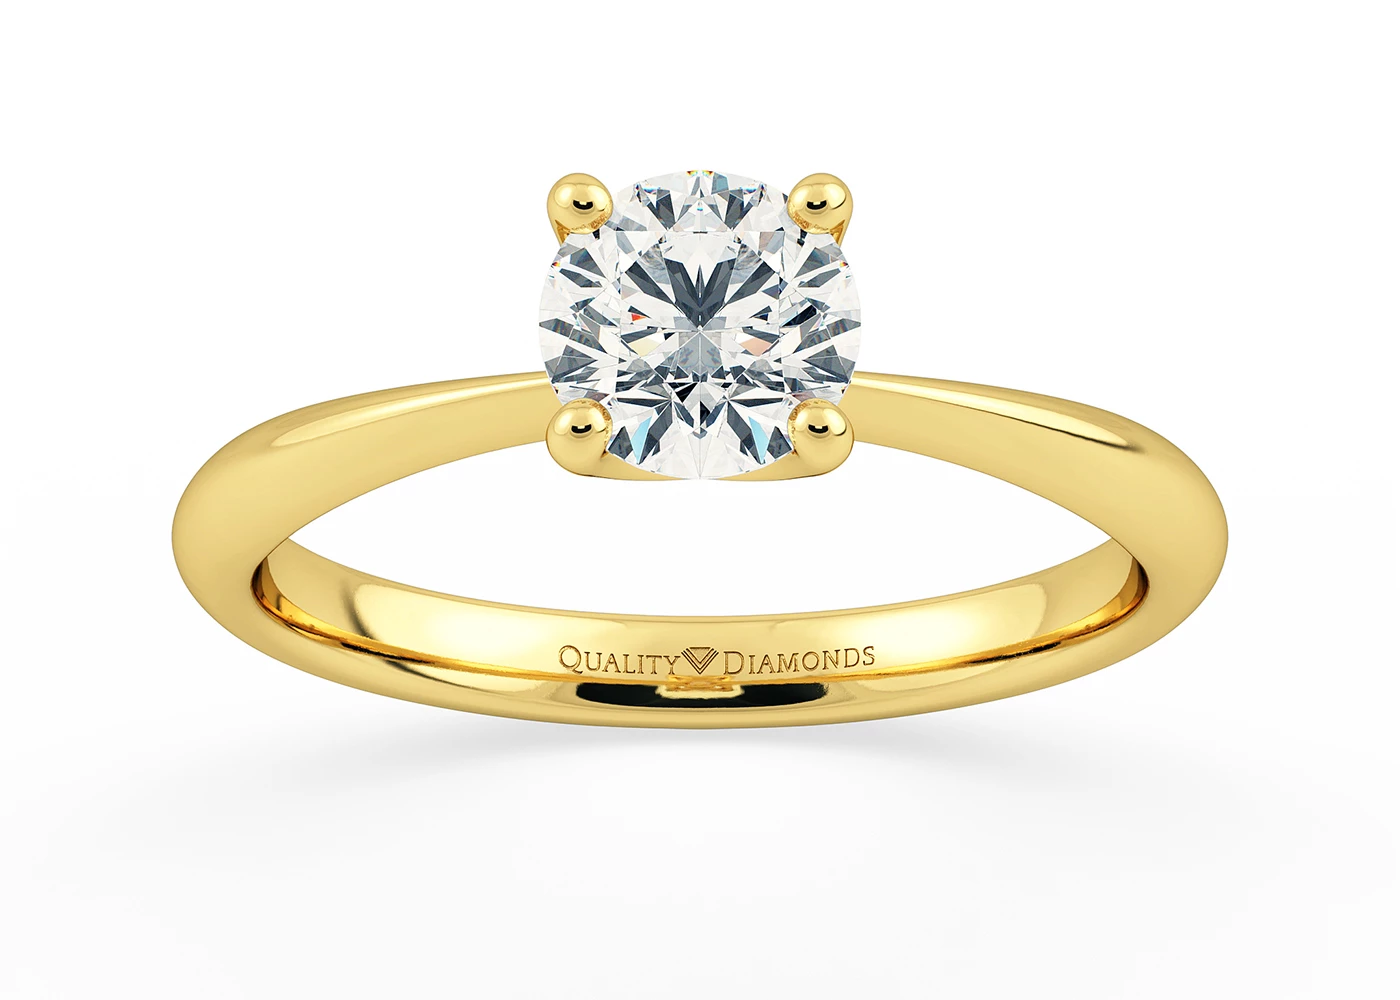 Two Carat Round Brilliant Solitaire Diamond Engagement Ring in 18K Yellow Gold